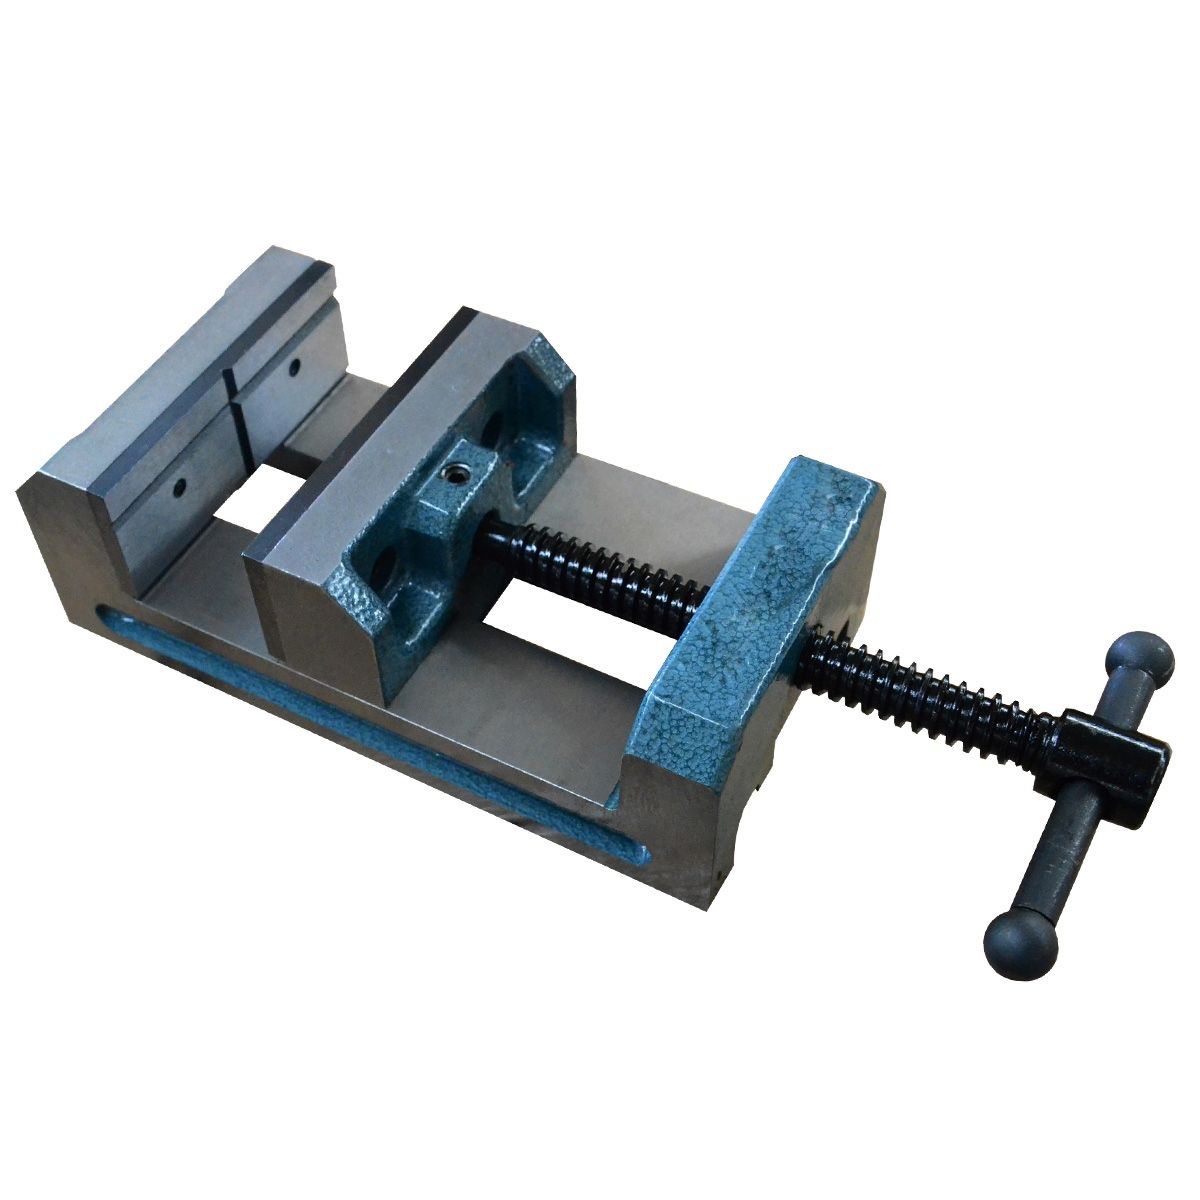 PRO-SERIES INDUSTRIAL 6" DRILL PRESS VISE (3901-0186)